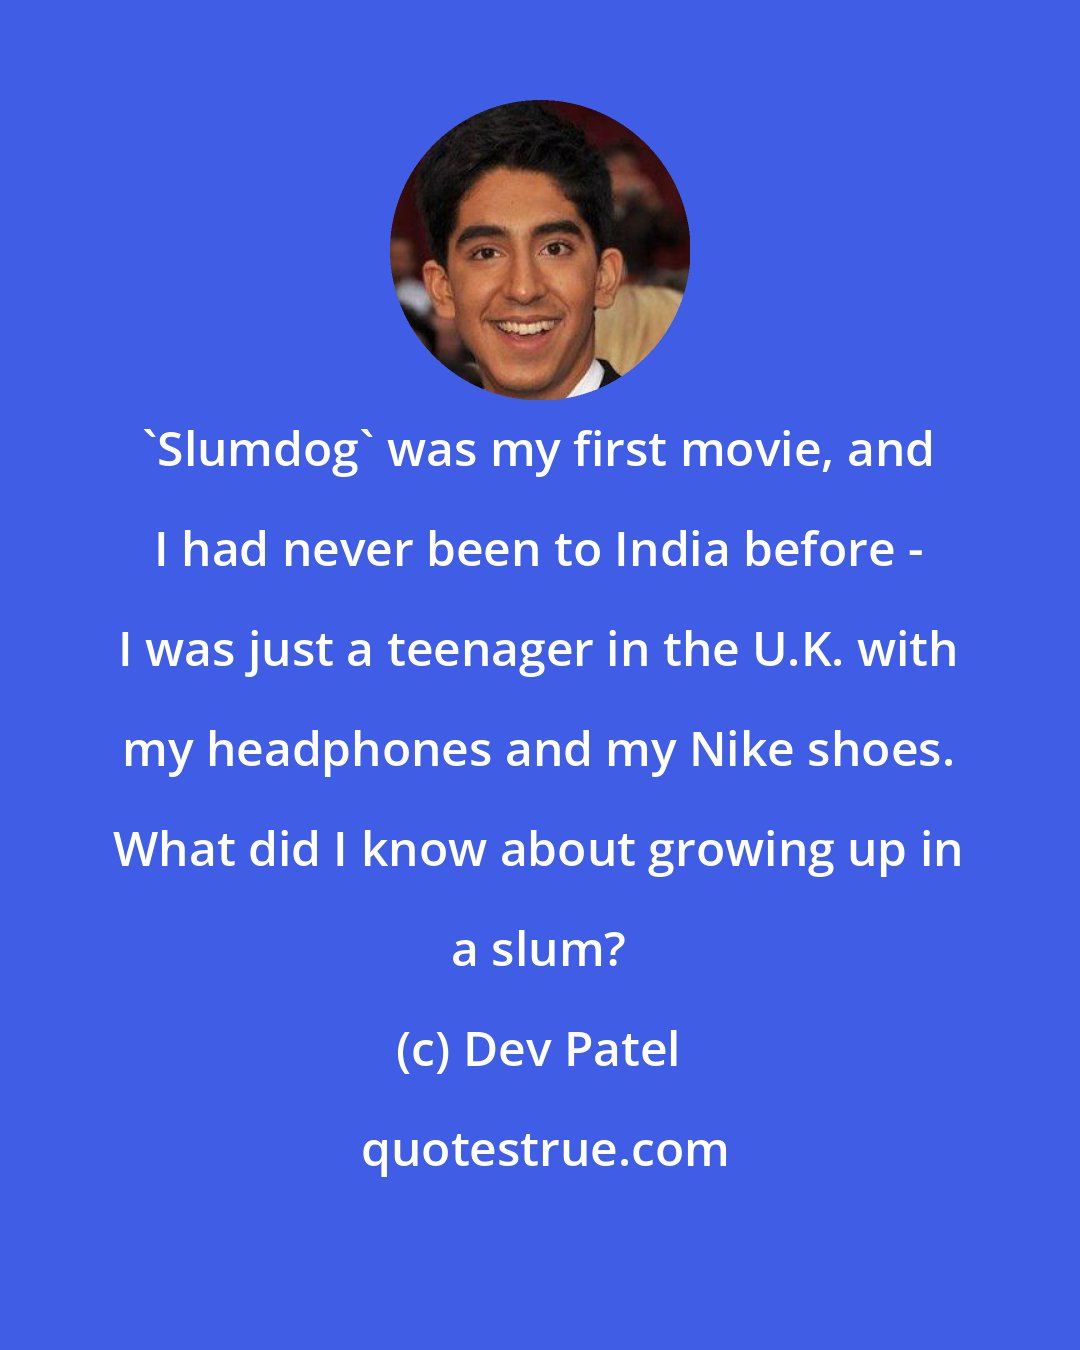 Dev Patel: 'Slumdog' was my first movie, and I had never been to India before - I was just a teenager in the U.K. with my headphones and my Nike shoes. What did I know about growing up in a slum?